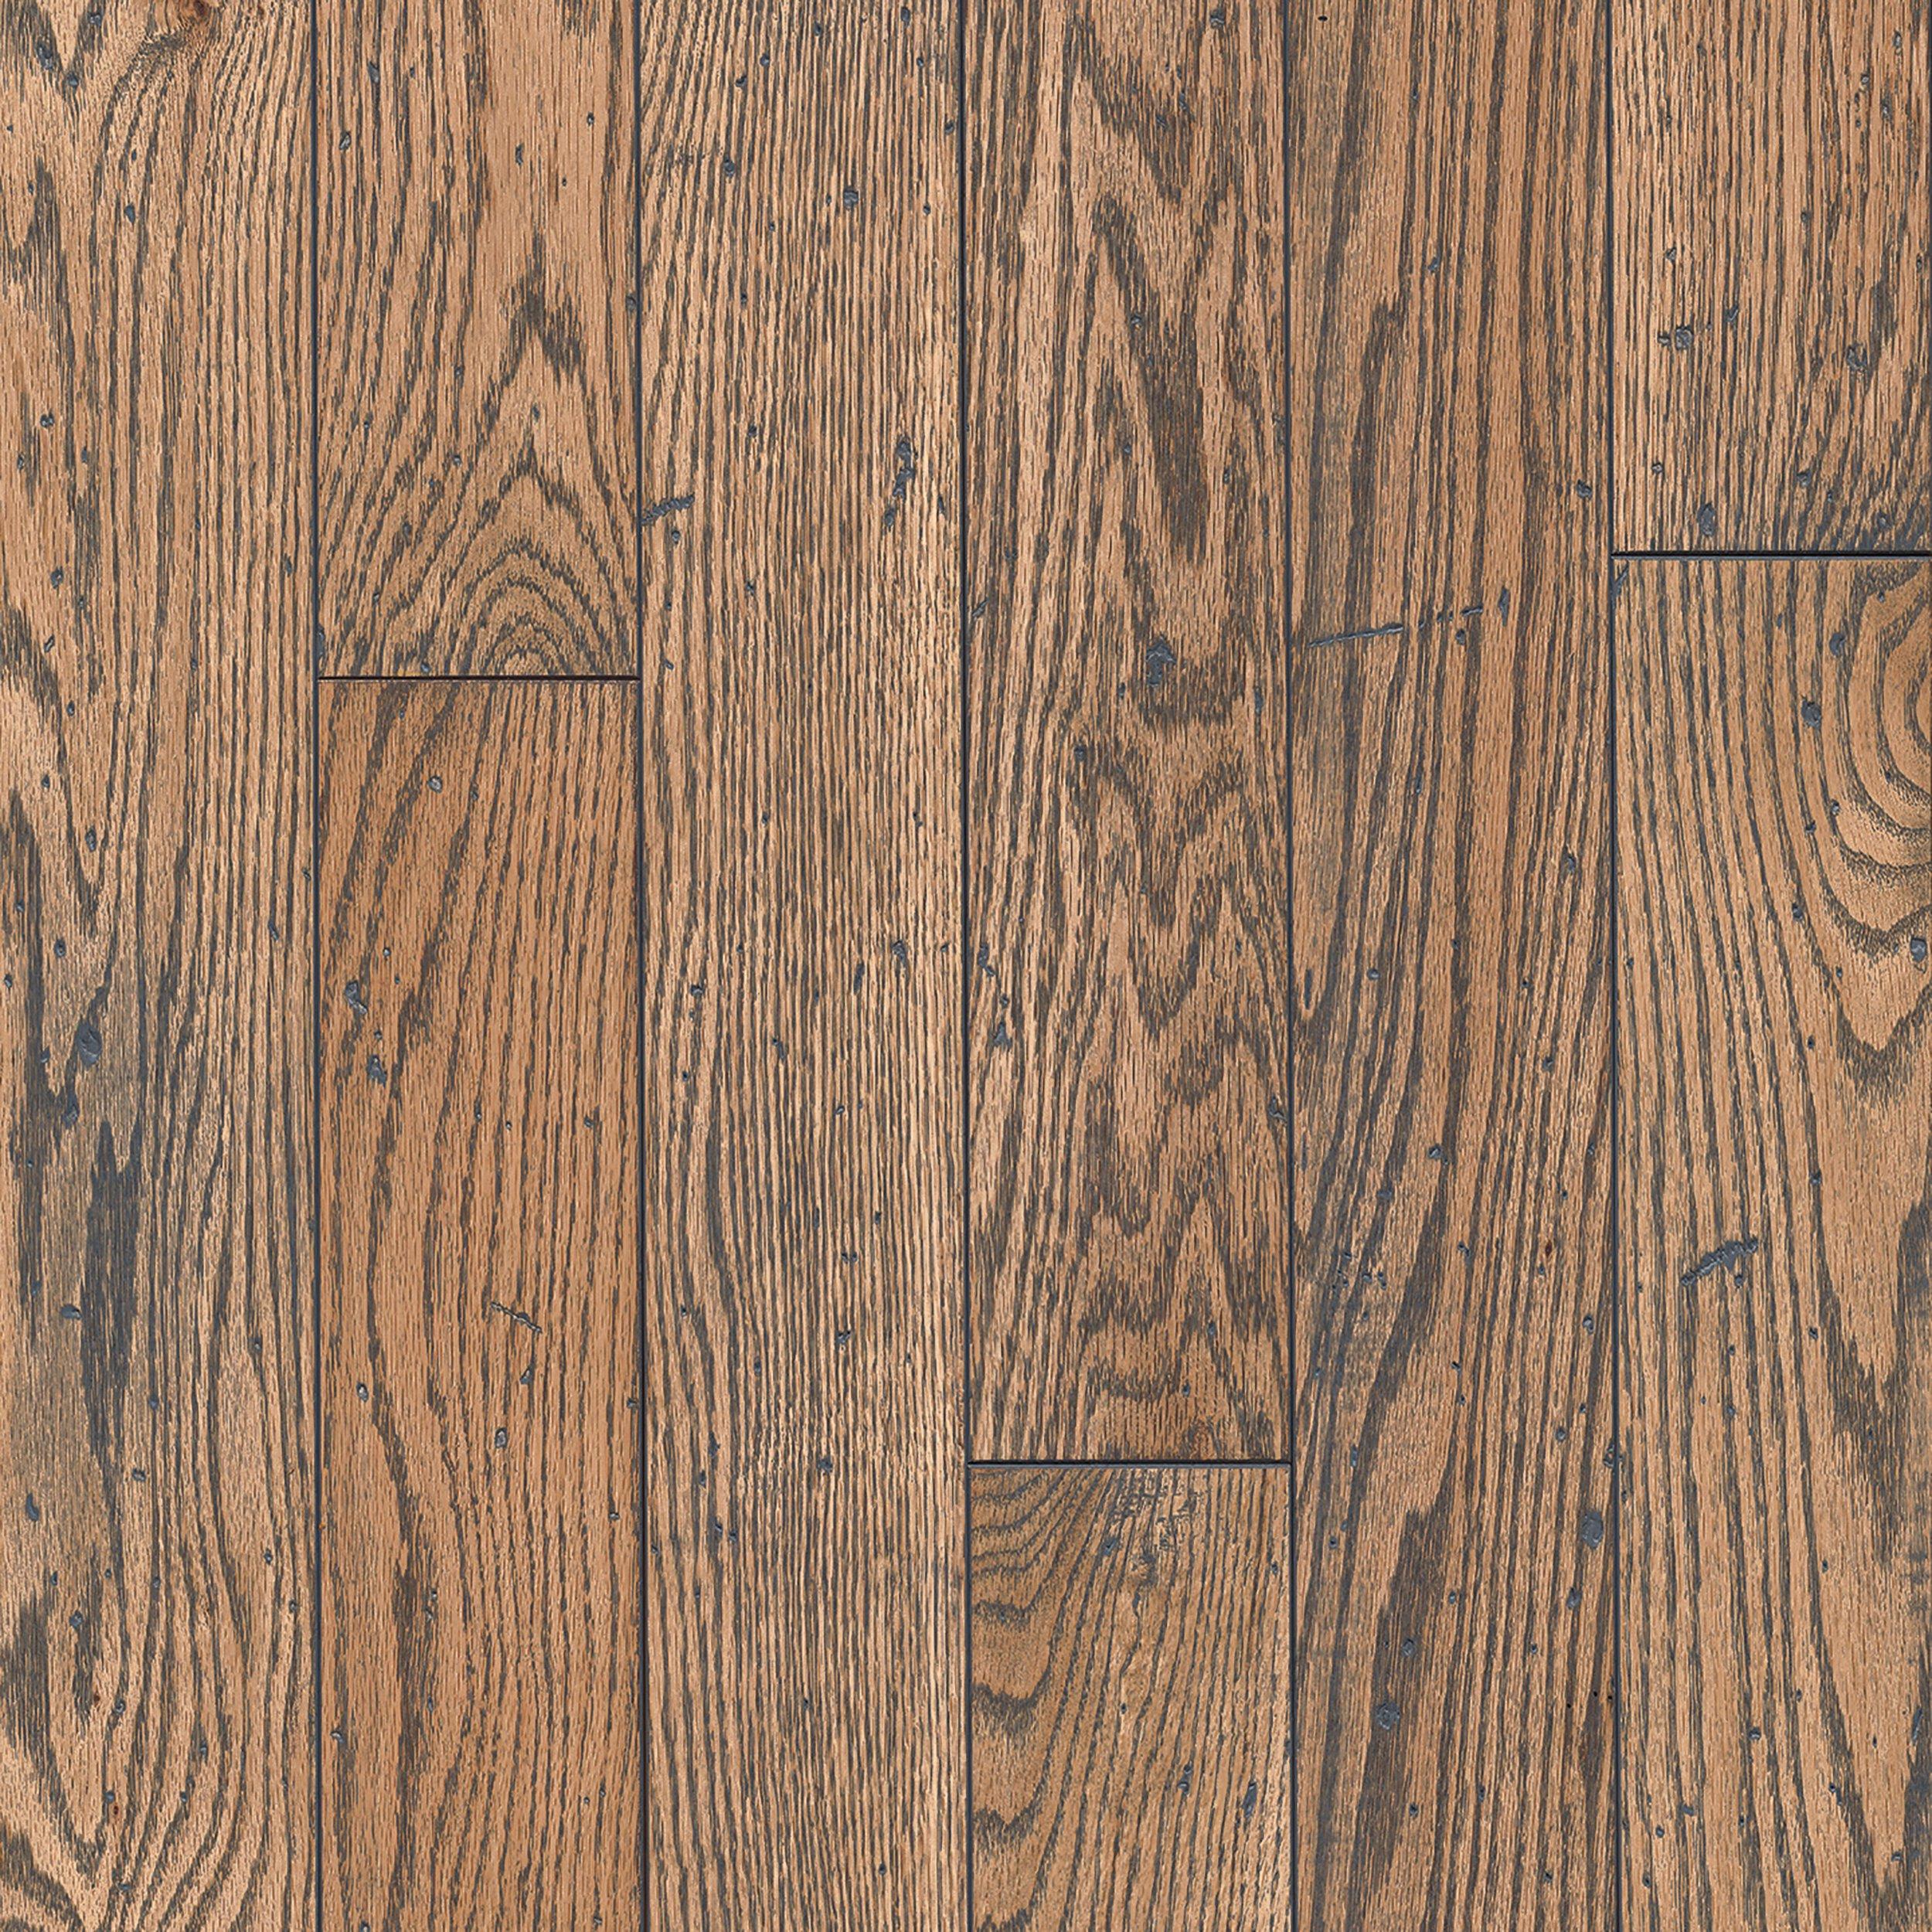 Natural Gray Oak Distressed Solid Hardwood 3 4in X 4in